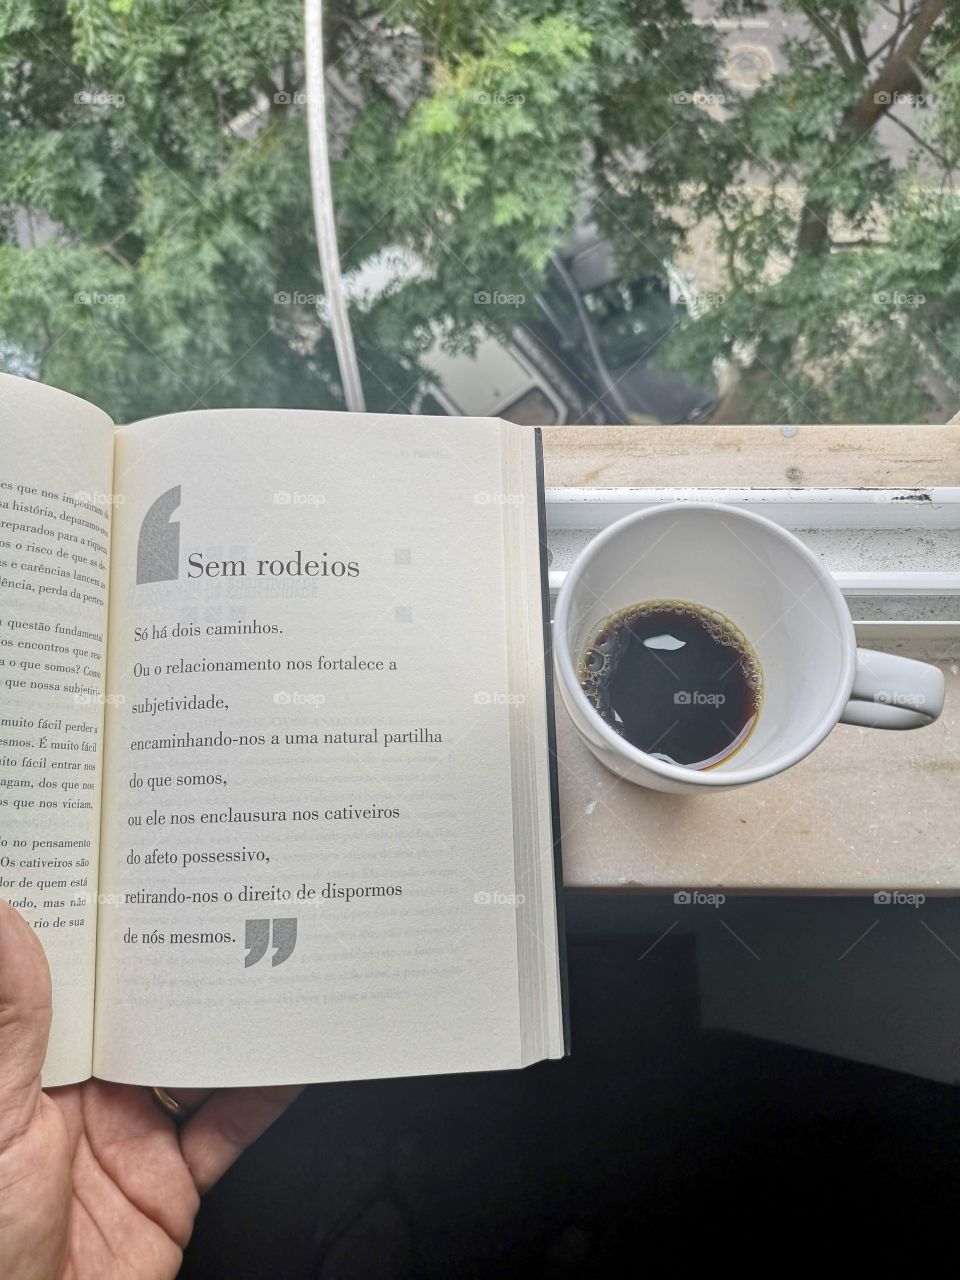 Reading with coffee in the apartment window